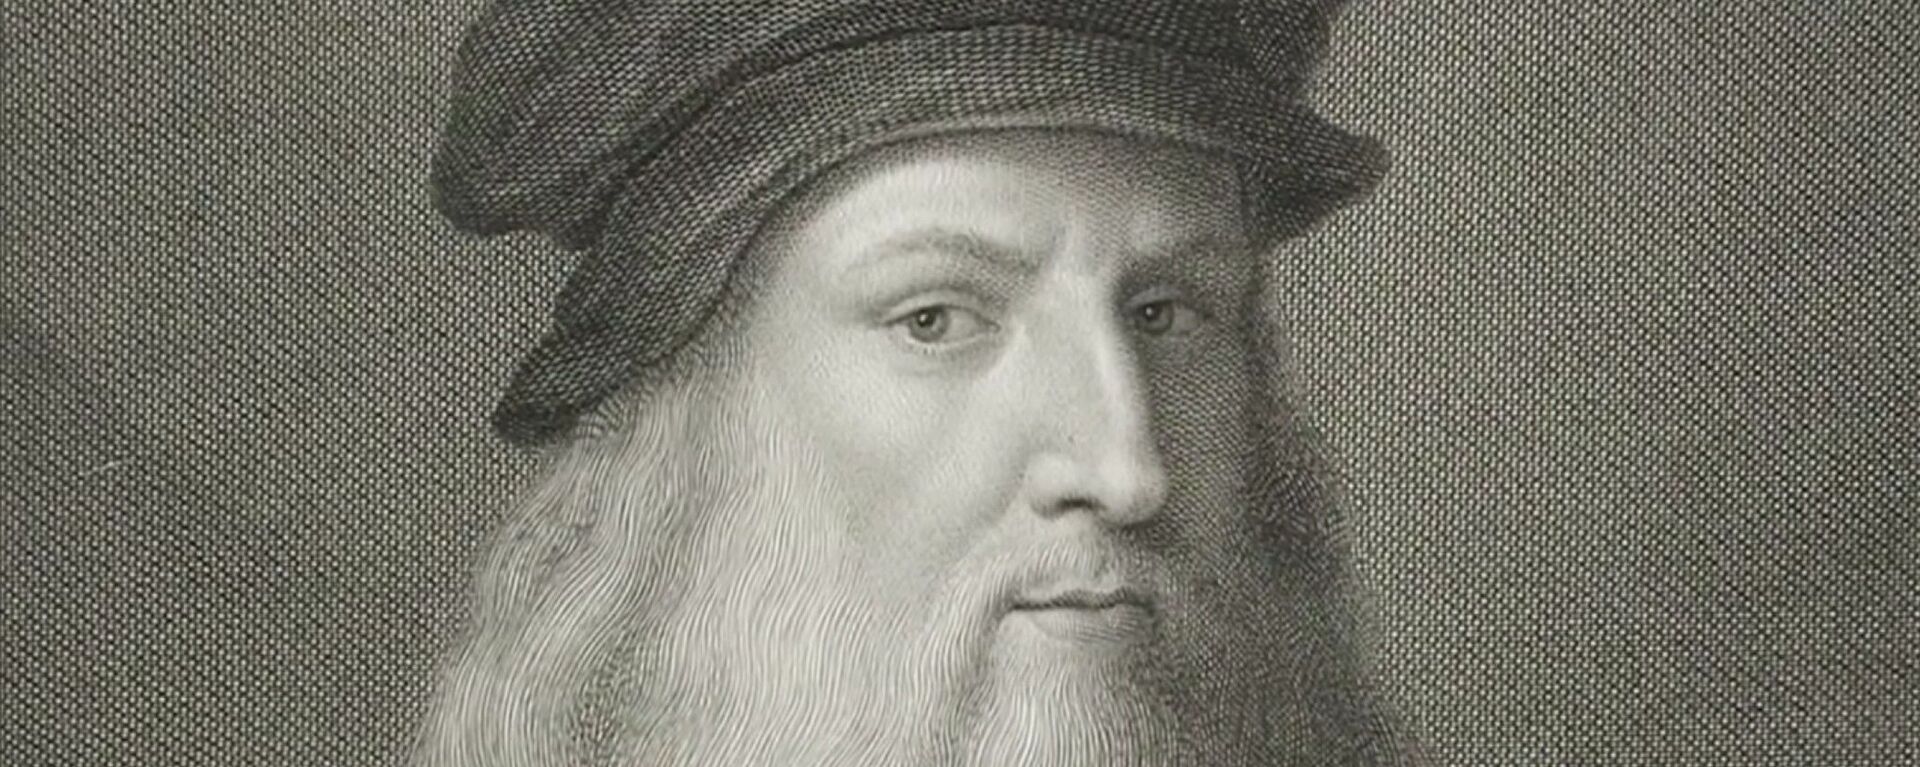 Screenshot captures image of Italian painter Leonardo da Vinci, whose works have recently come under renewed scrutiny amid beliefs that newly discovered red chalk painting may be his work. - Sputnik International, 1920, 19.11.2020